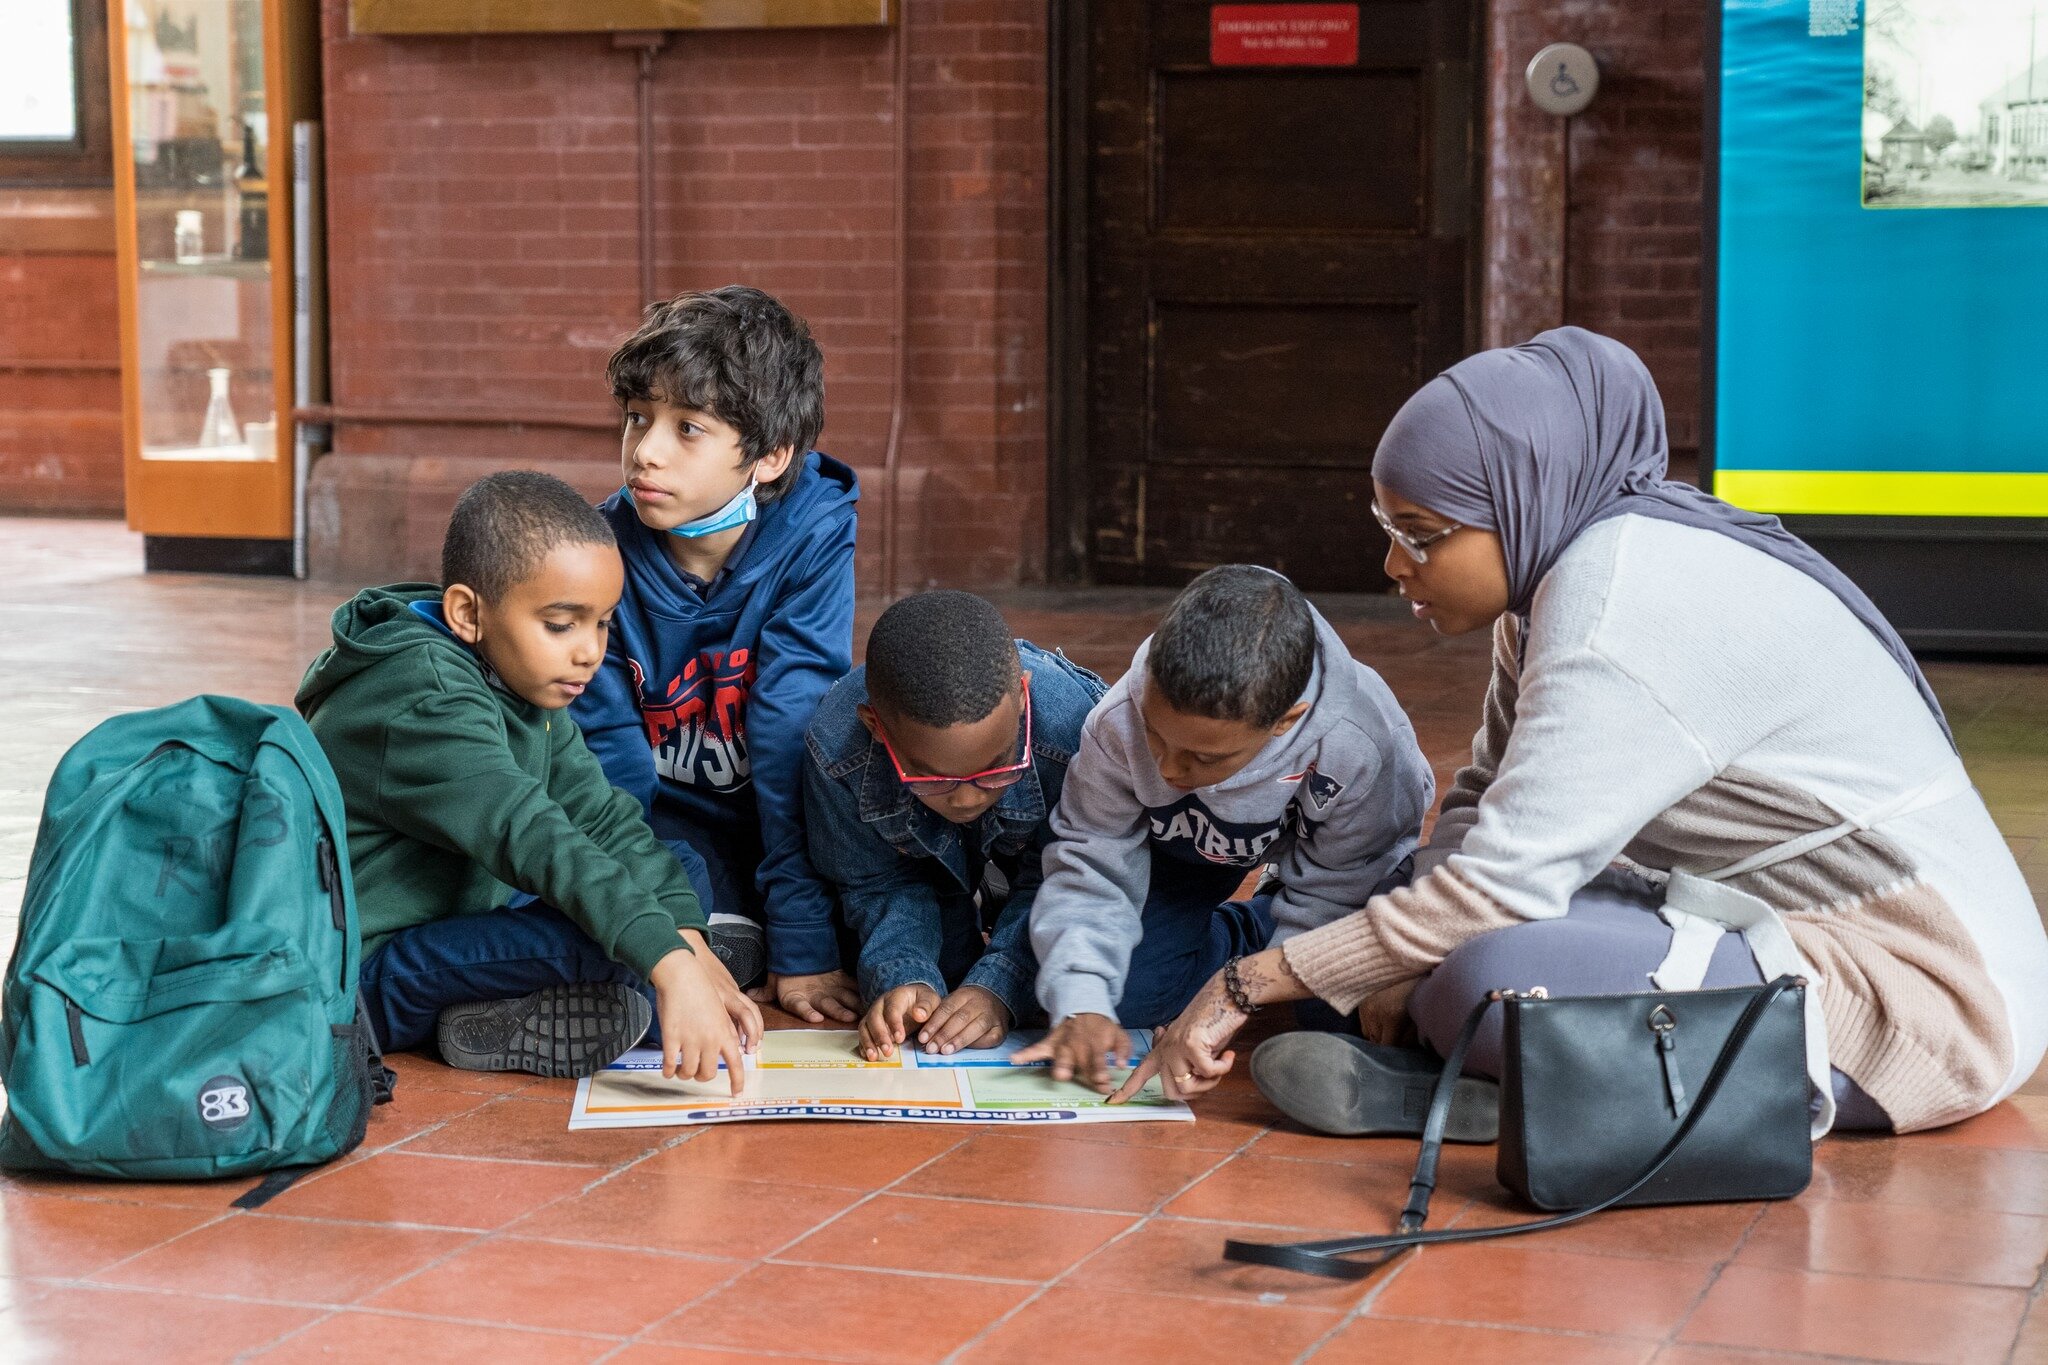 3rd Grade had a great trip to the Waterworks Museum in Chestnut Hill last week! The folks from the museum are dedicated to engaging curious minds with STEM, history, and water issues at home &amp; abroad. Thanks for having us, @metrowaterworks! 

#JA